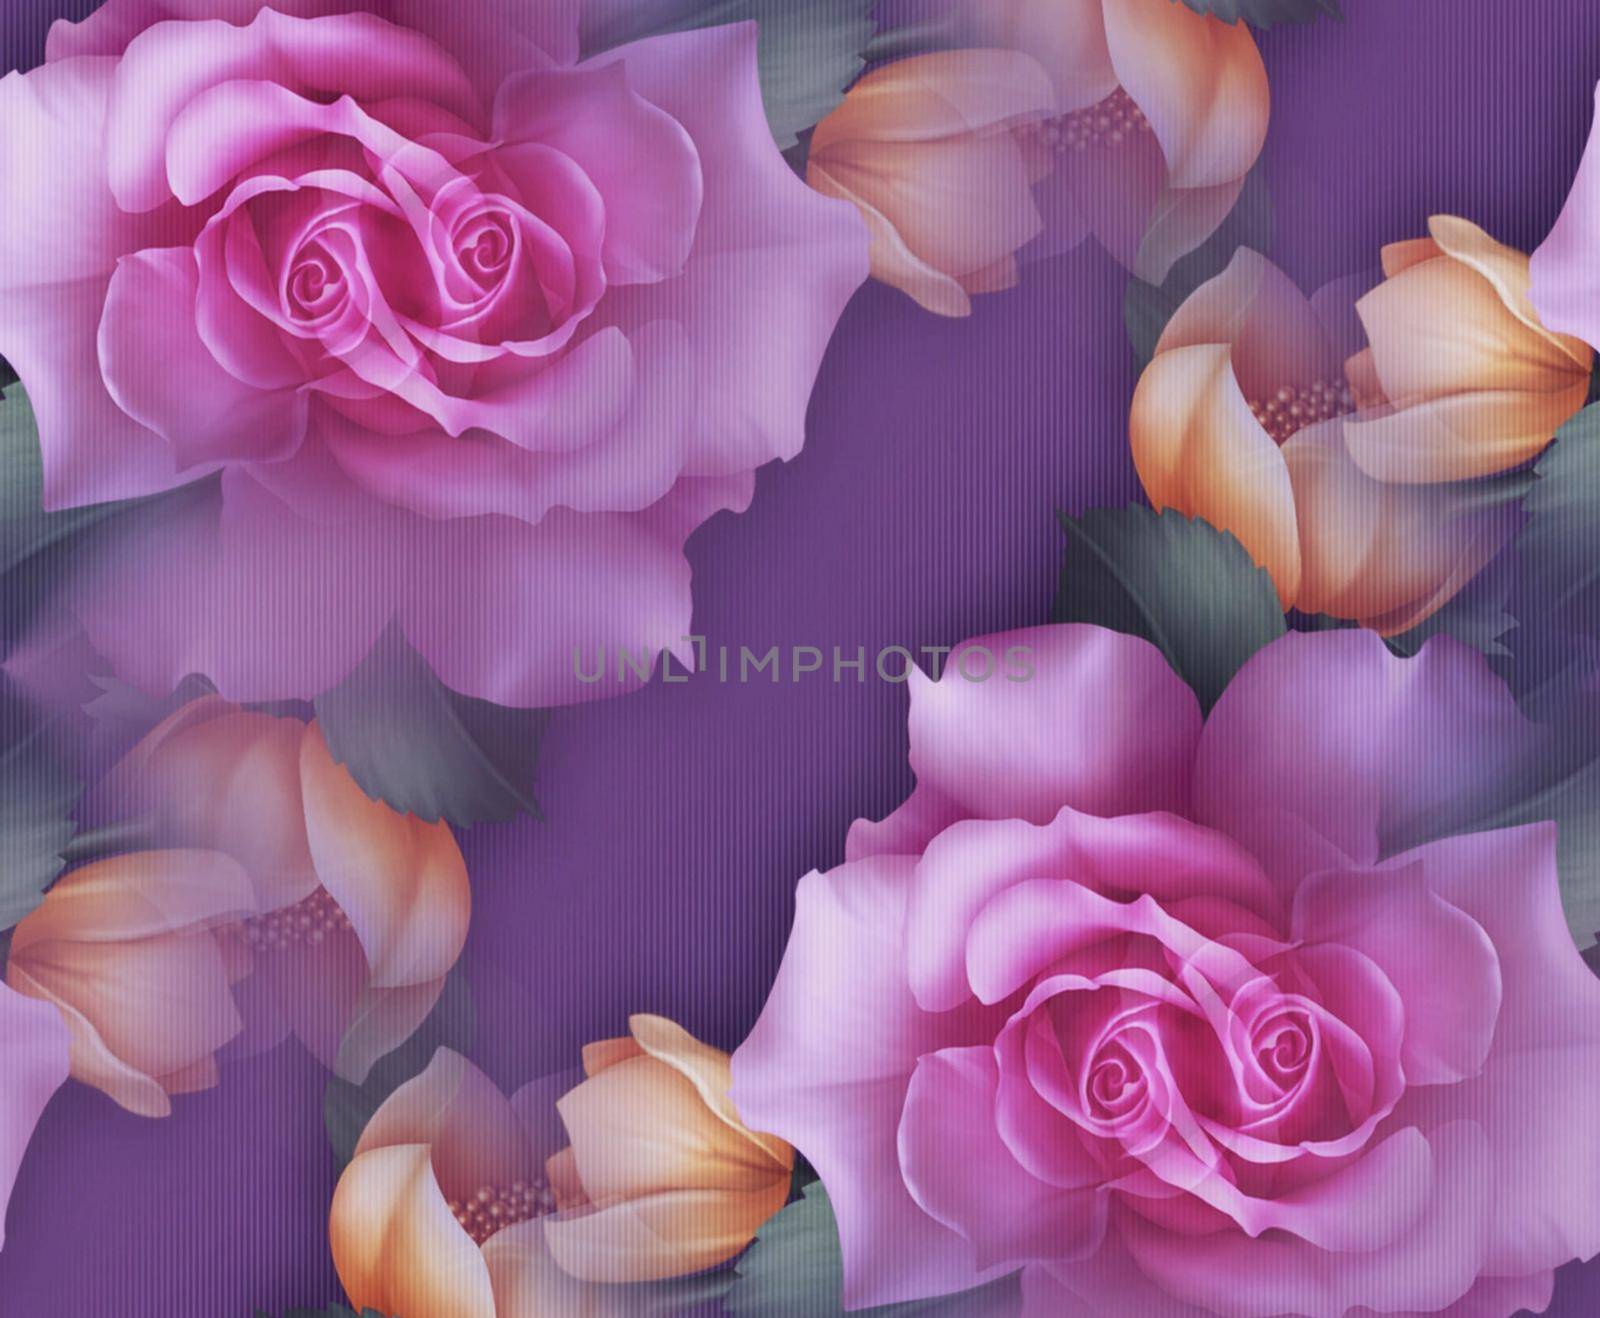 Flowers backgrounds perfect for wrappers, wallpapers, postcards, greeting cards, wedding invitations, romantic events.